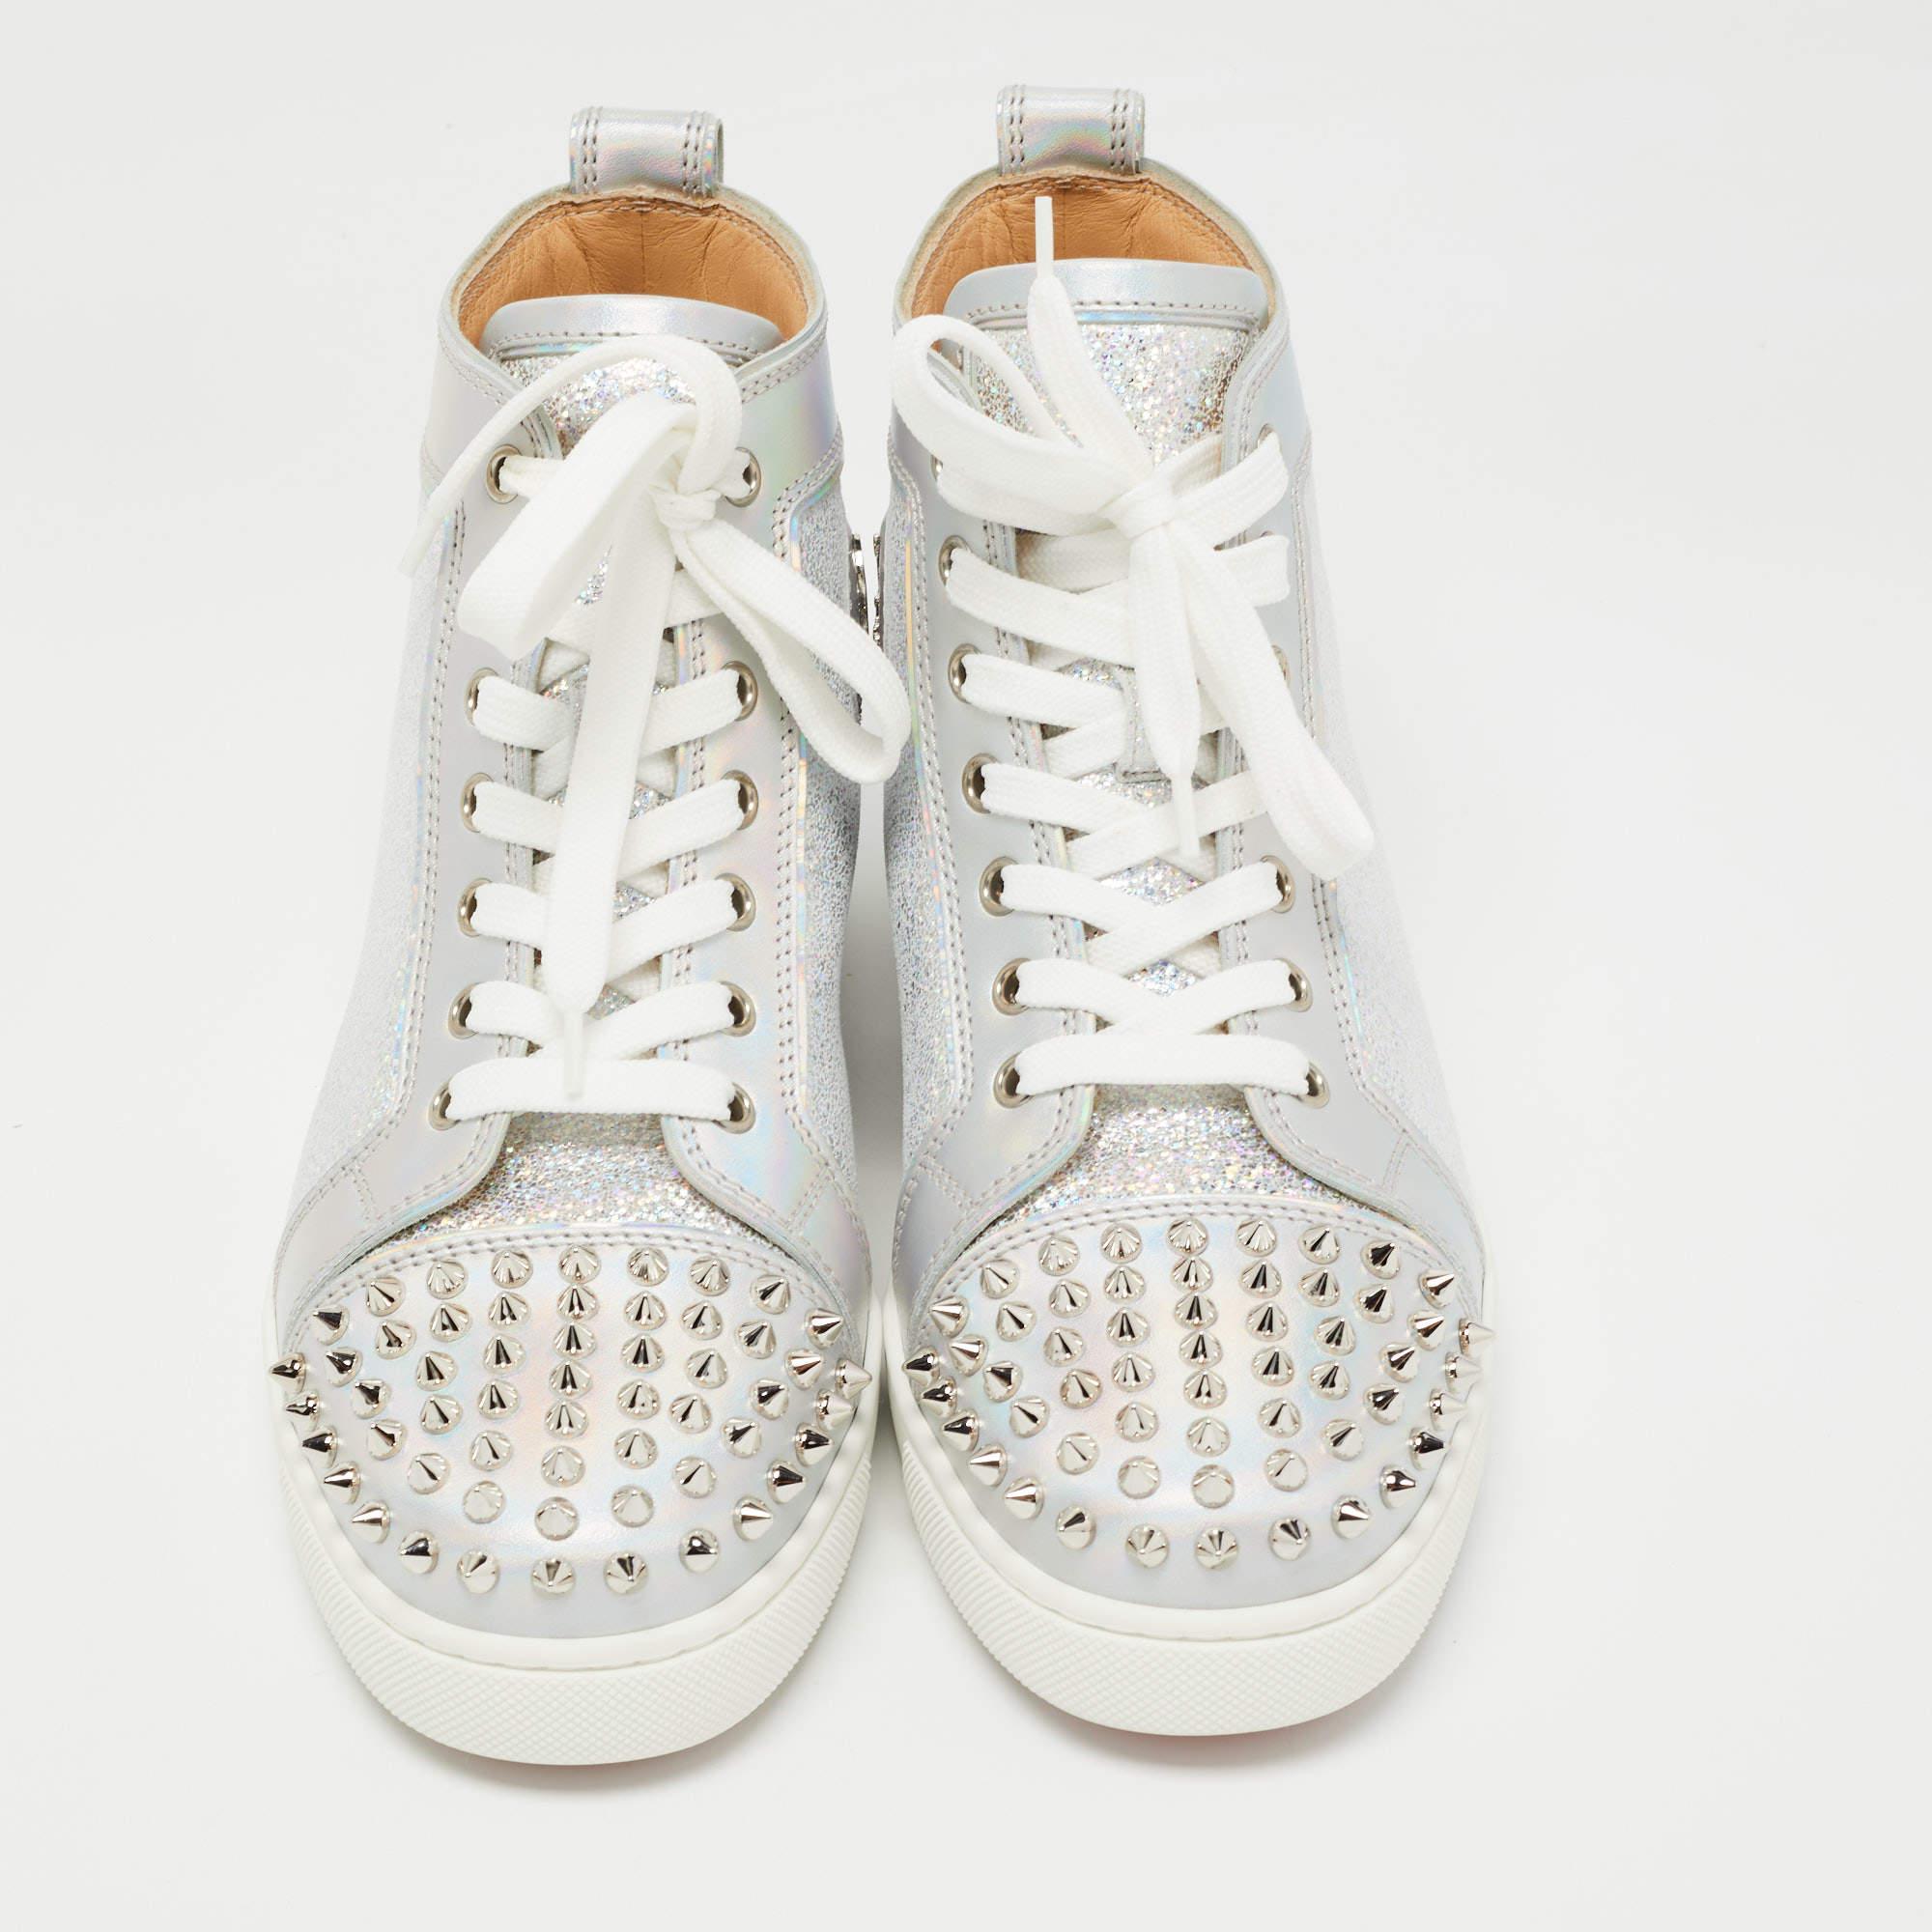 The addition of spikes makes these Christian Louboutin sneakers undeniably chic and striking. They are created from silver laminated suede and leather with lace-up vamps, pull-tab at the counters, and comfortable soles.

Includes: Original Dustbag,